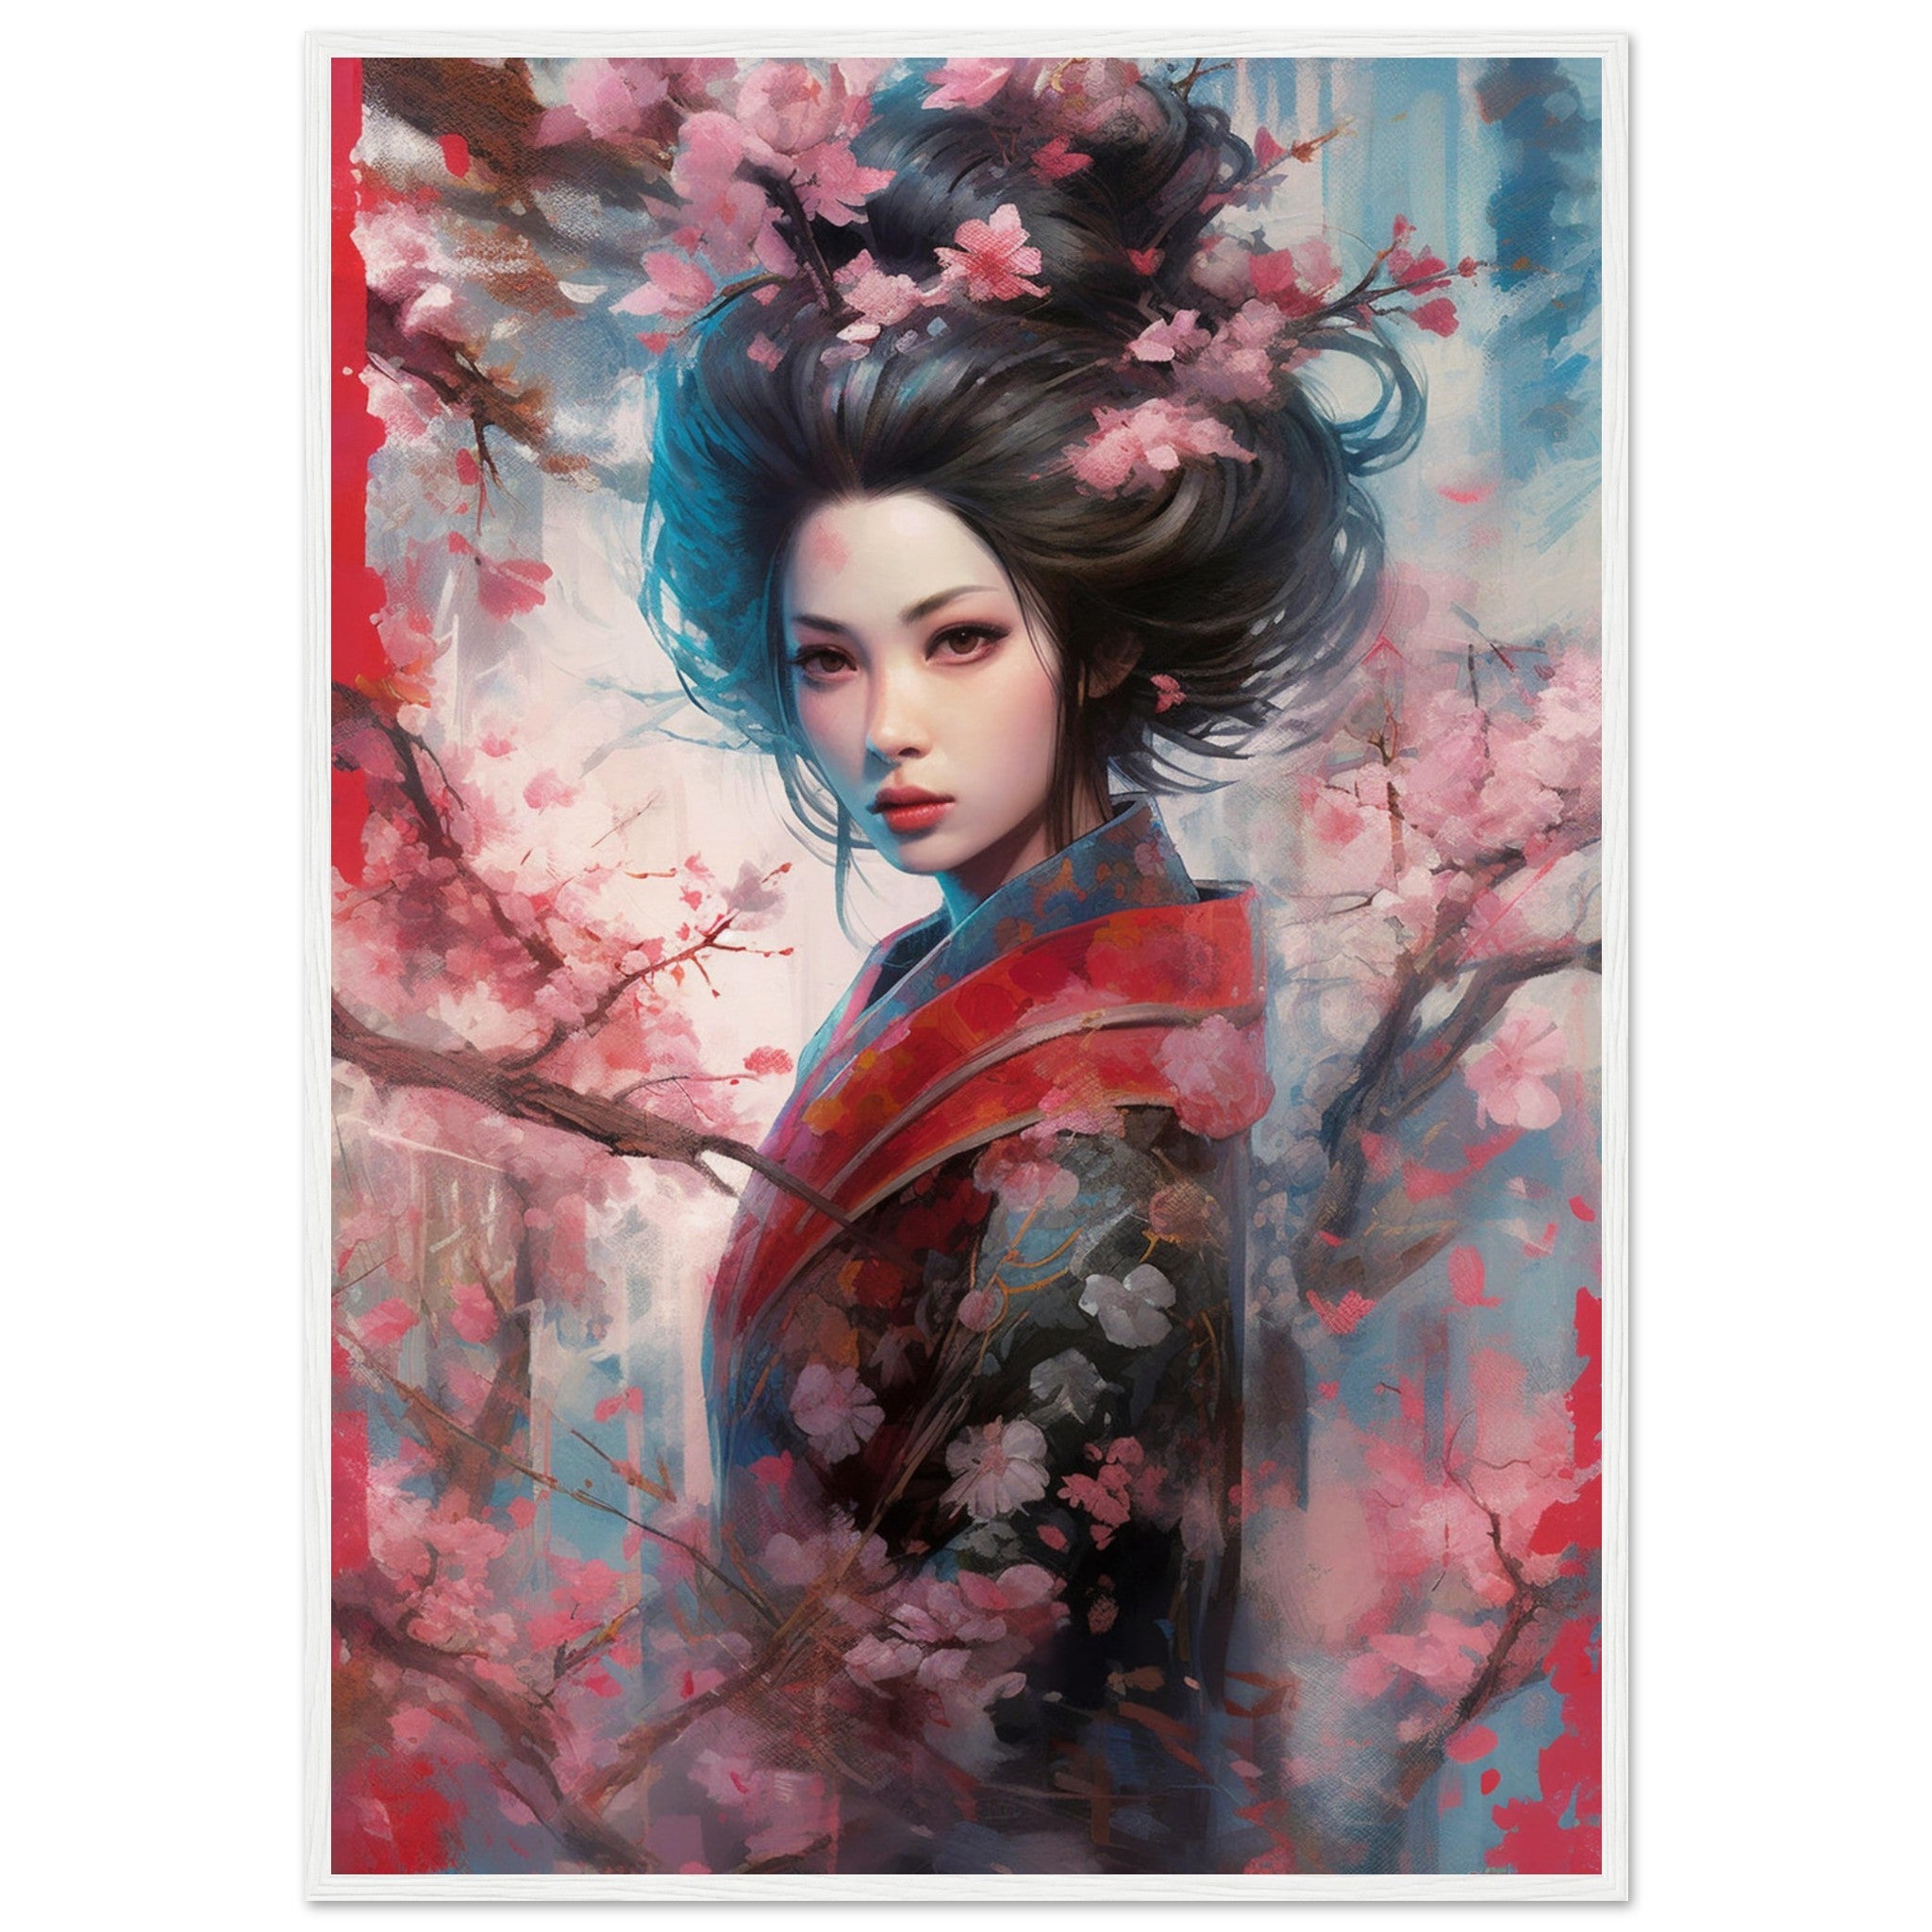 Japanese girl looking through cherry blossoms - immersiarts